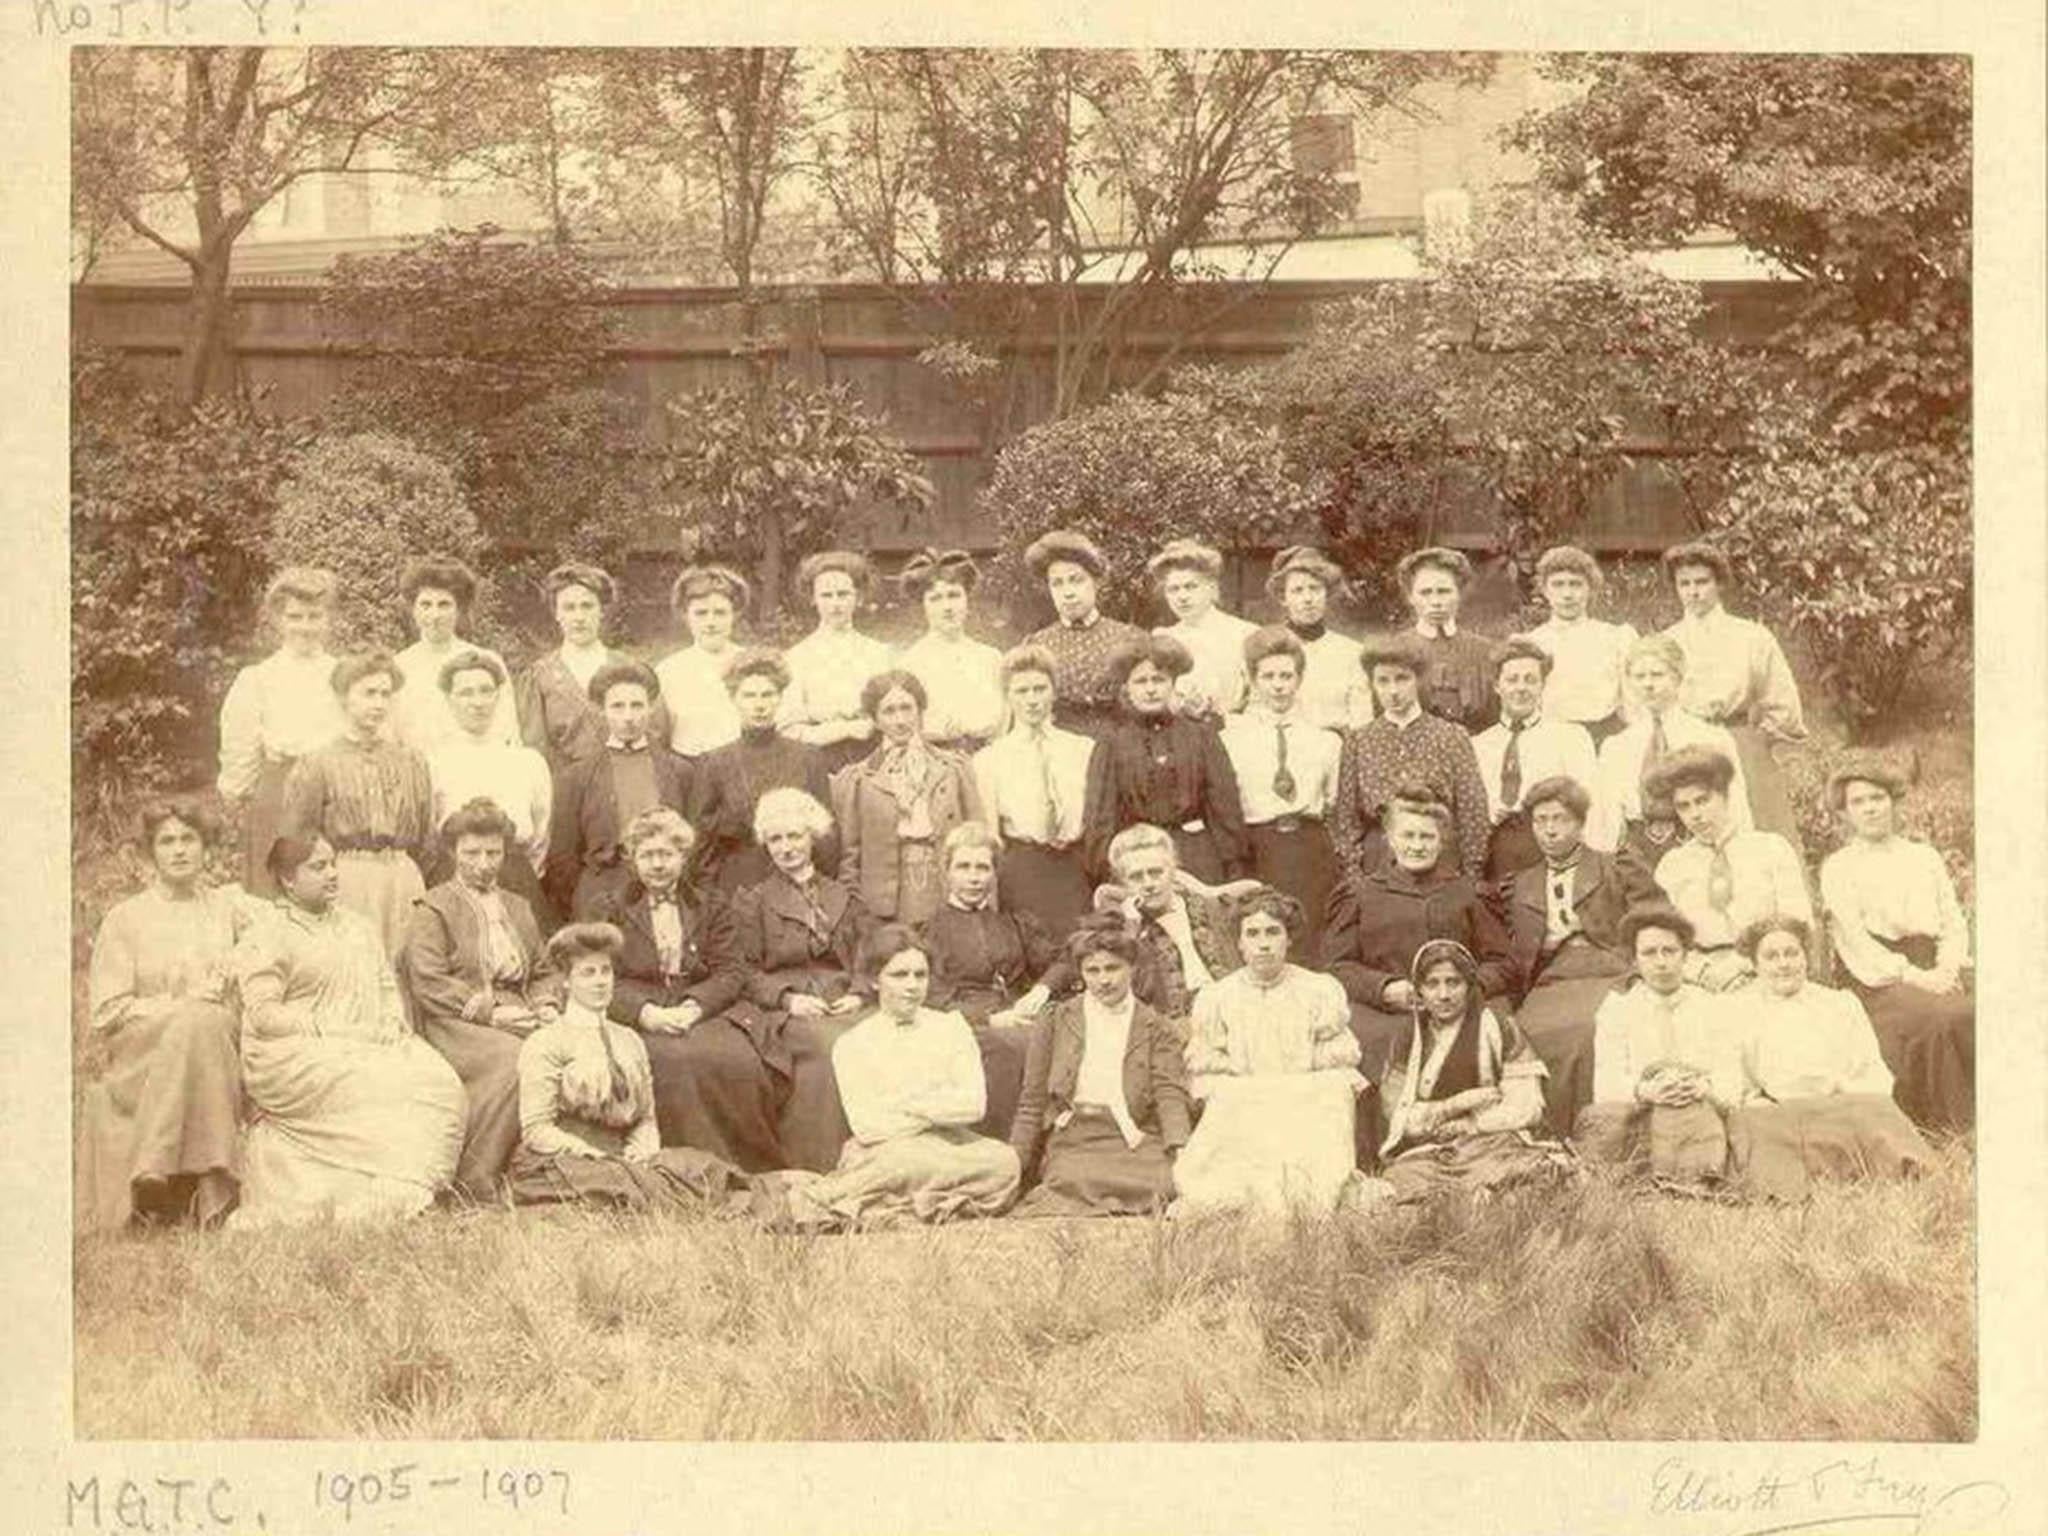 Group photo of female students studying at Maria Grey College, London, 1905-1907